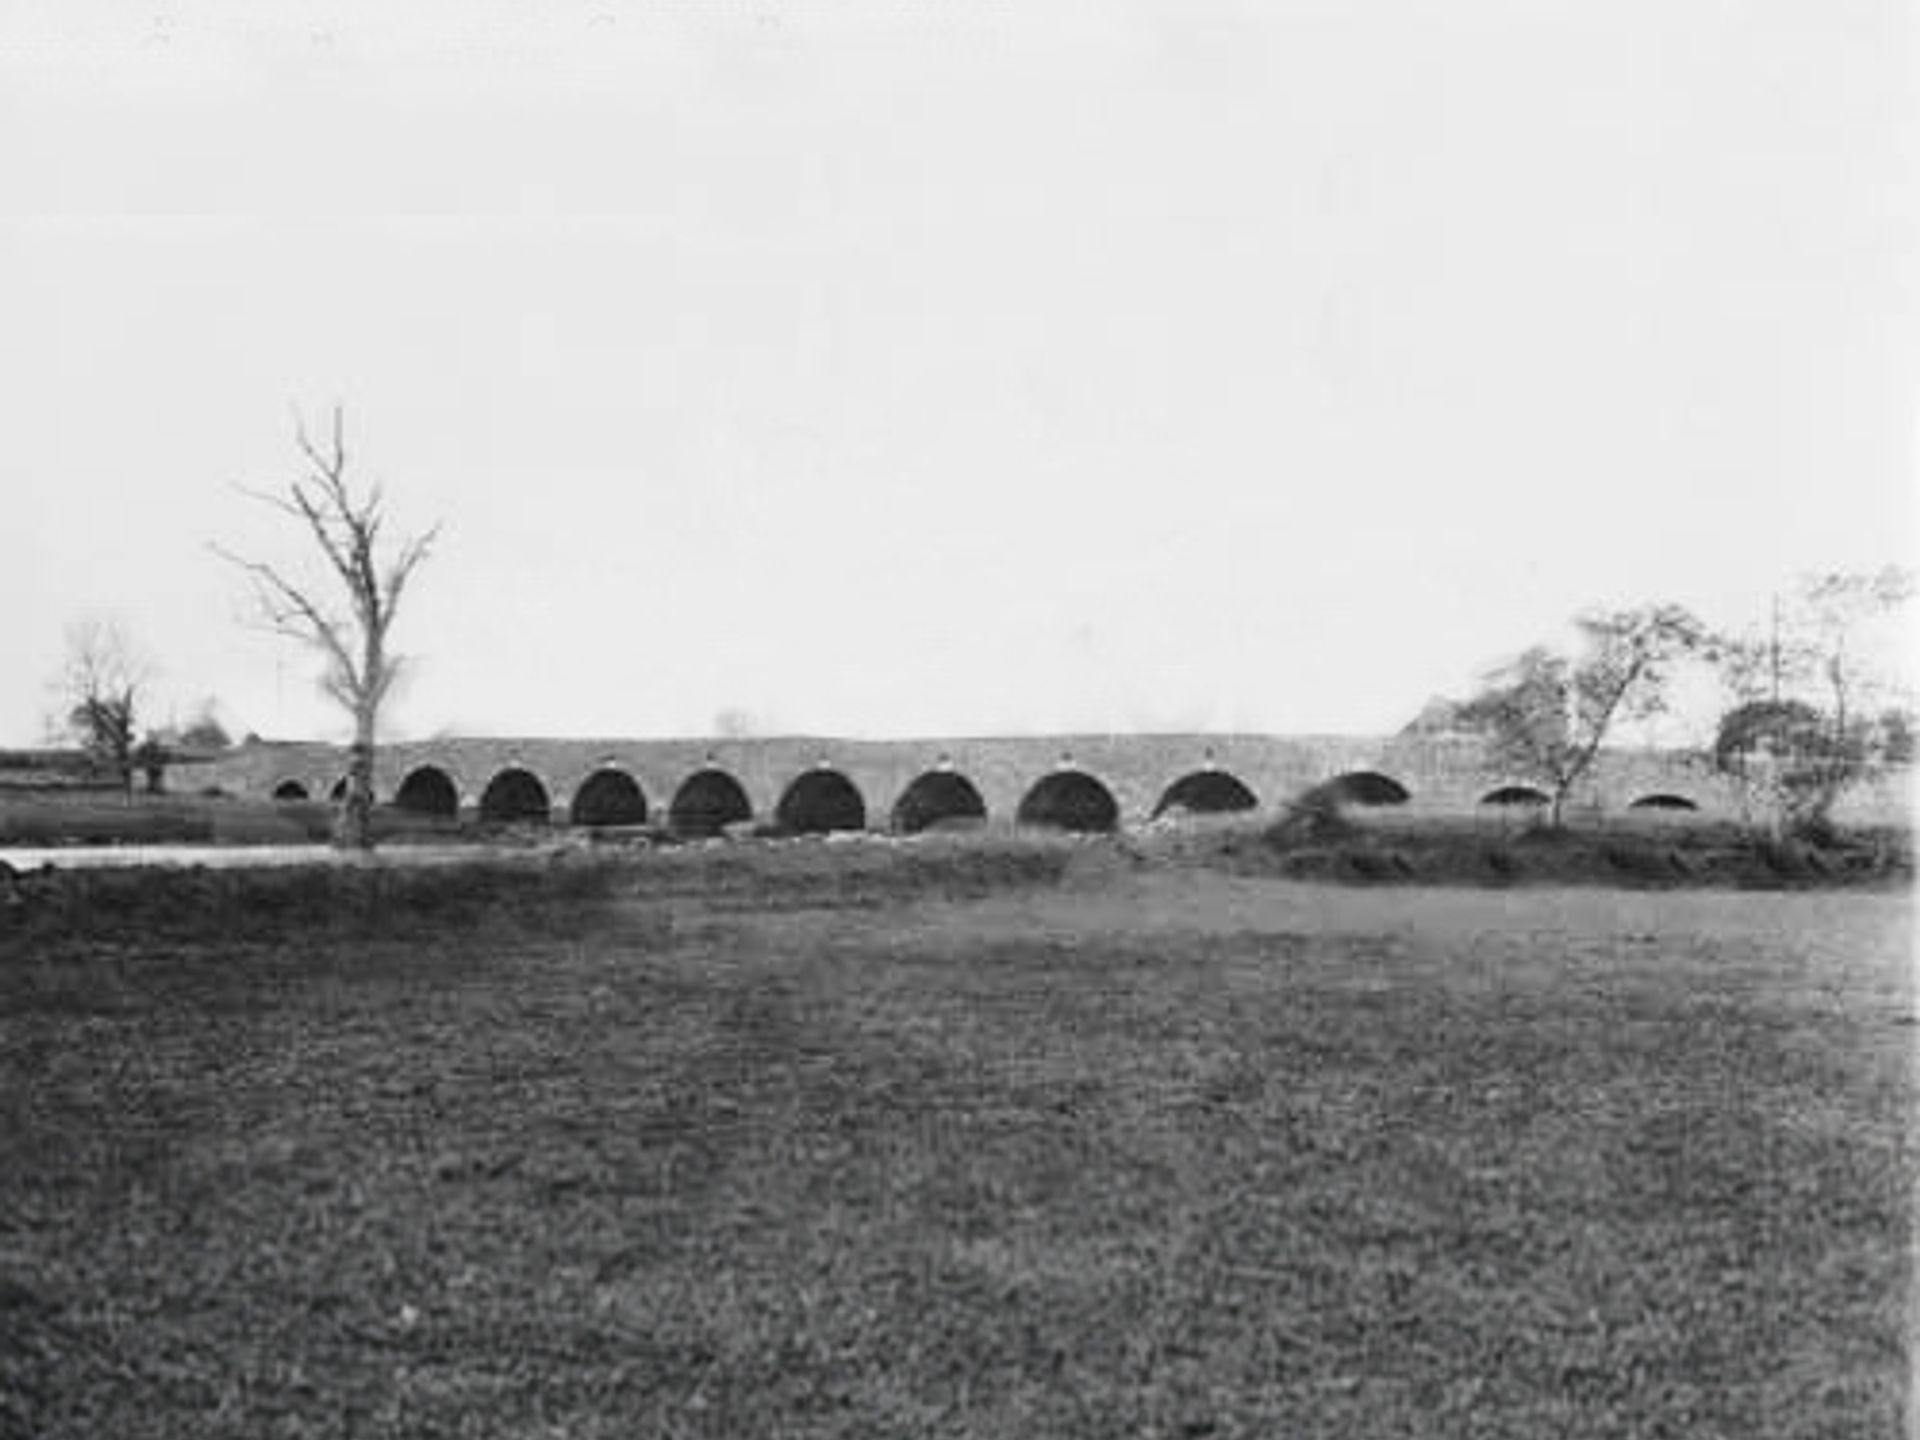 Ballyforan developed around a taxing bridge over the River Suck. Since 1820 this has been a thirteen arch bridge which is still in use today.